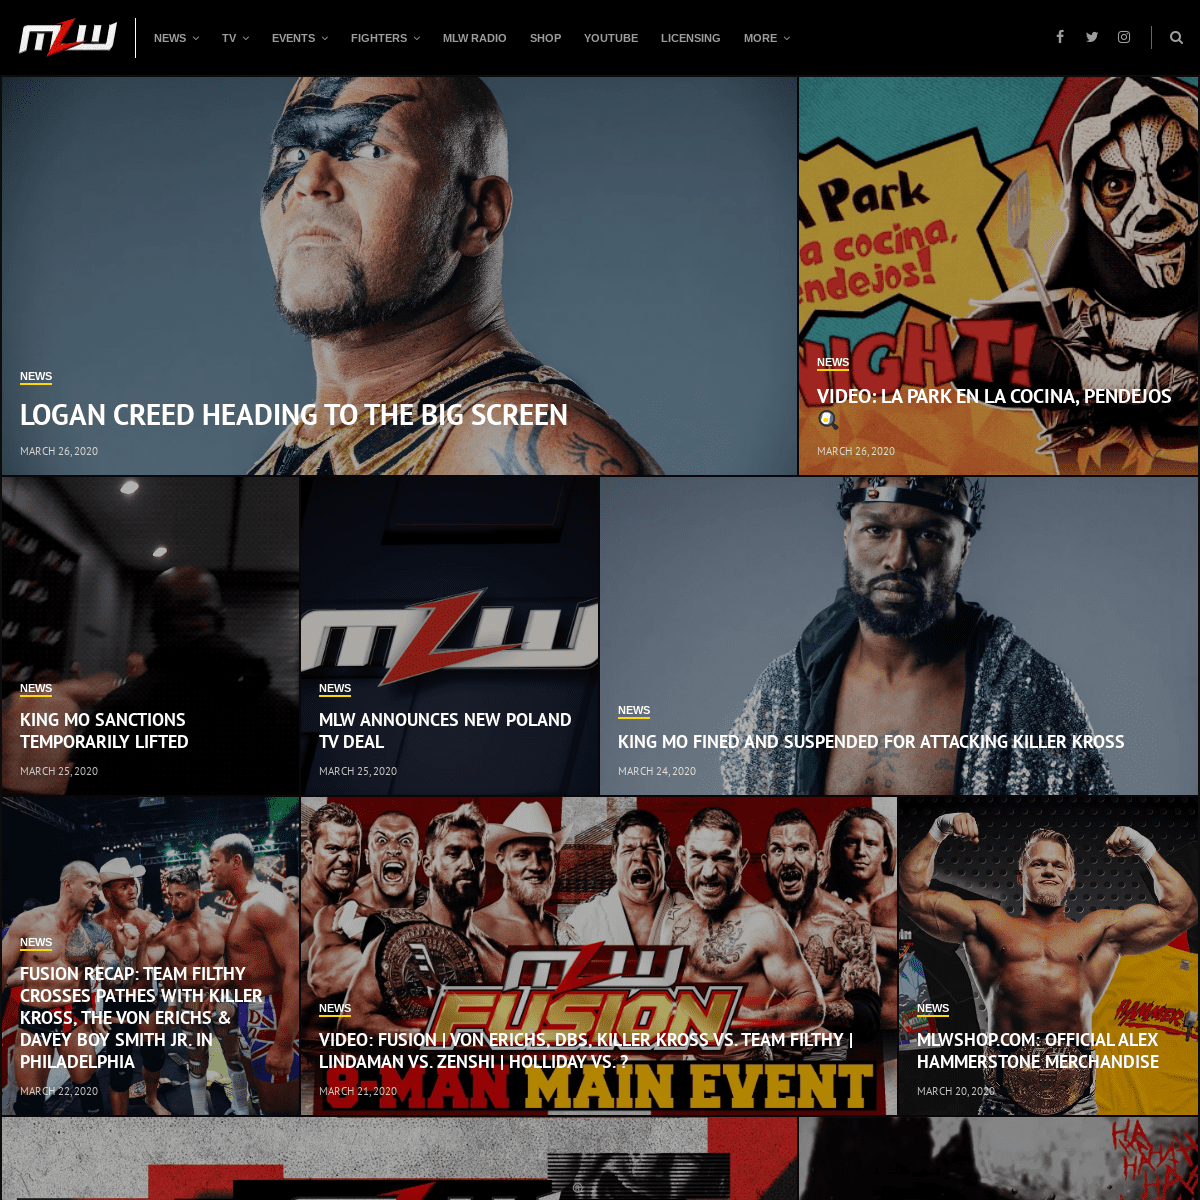 A complete backup of mlw.com